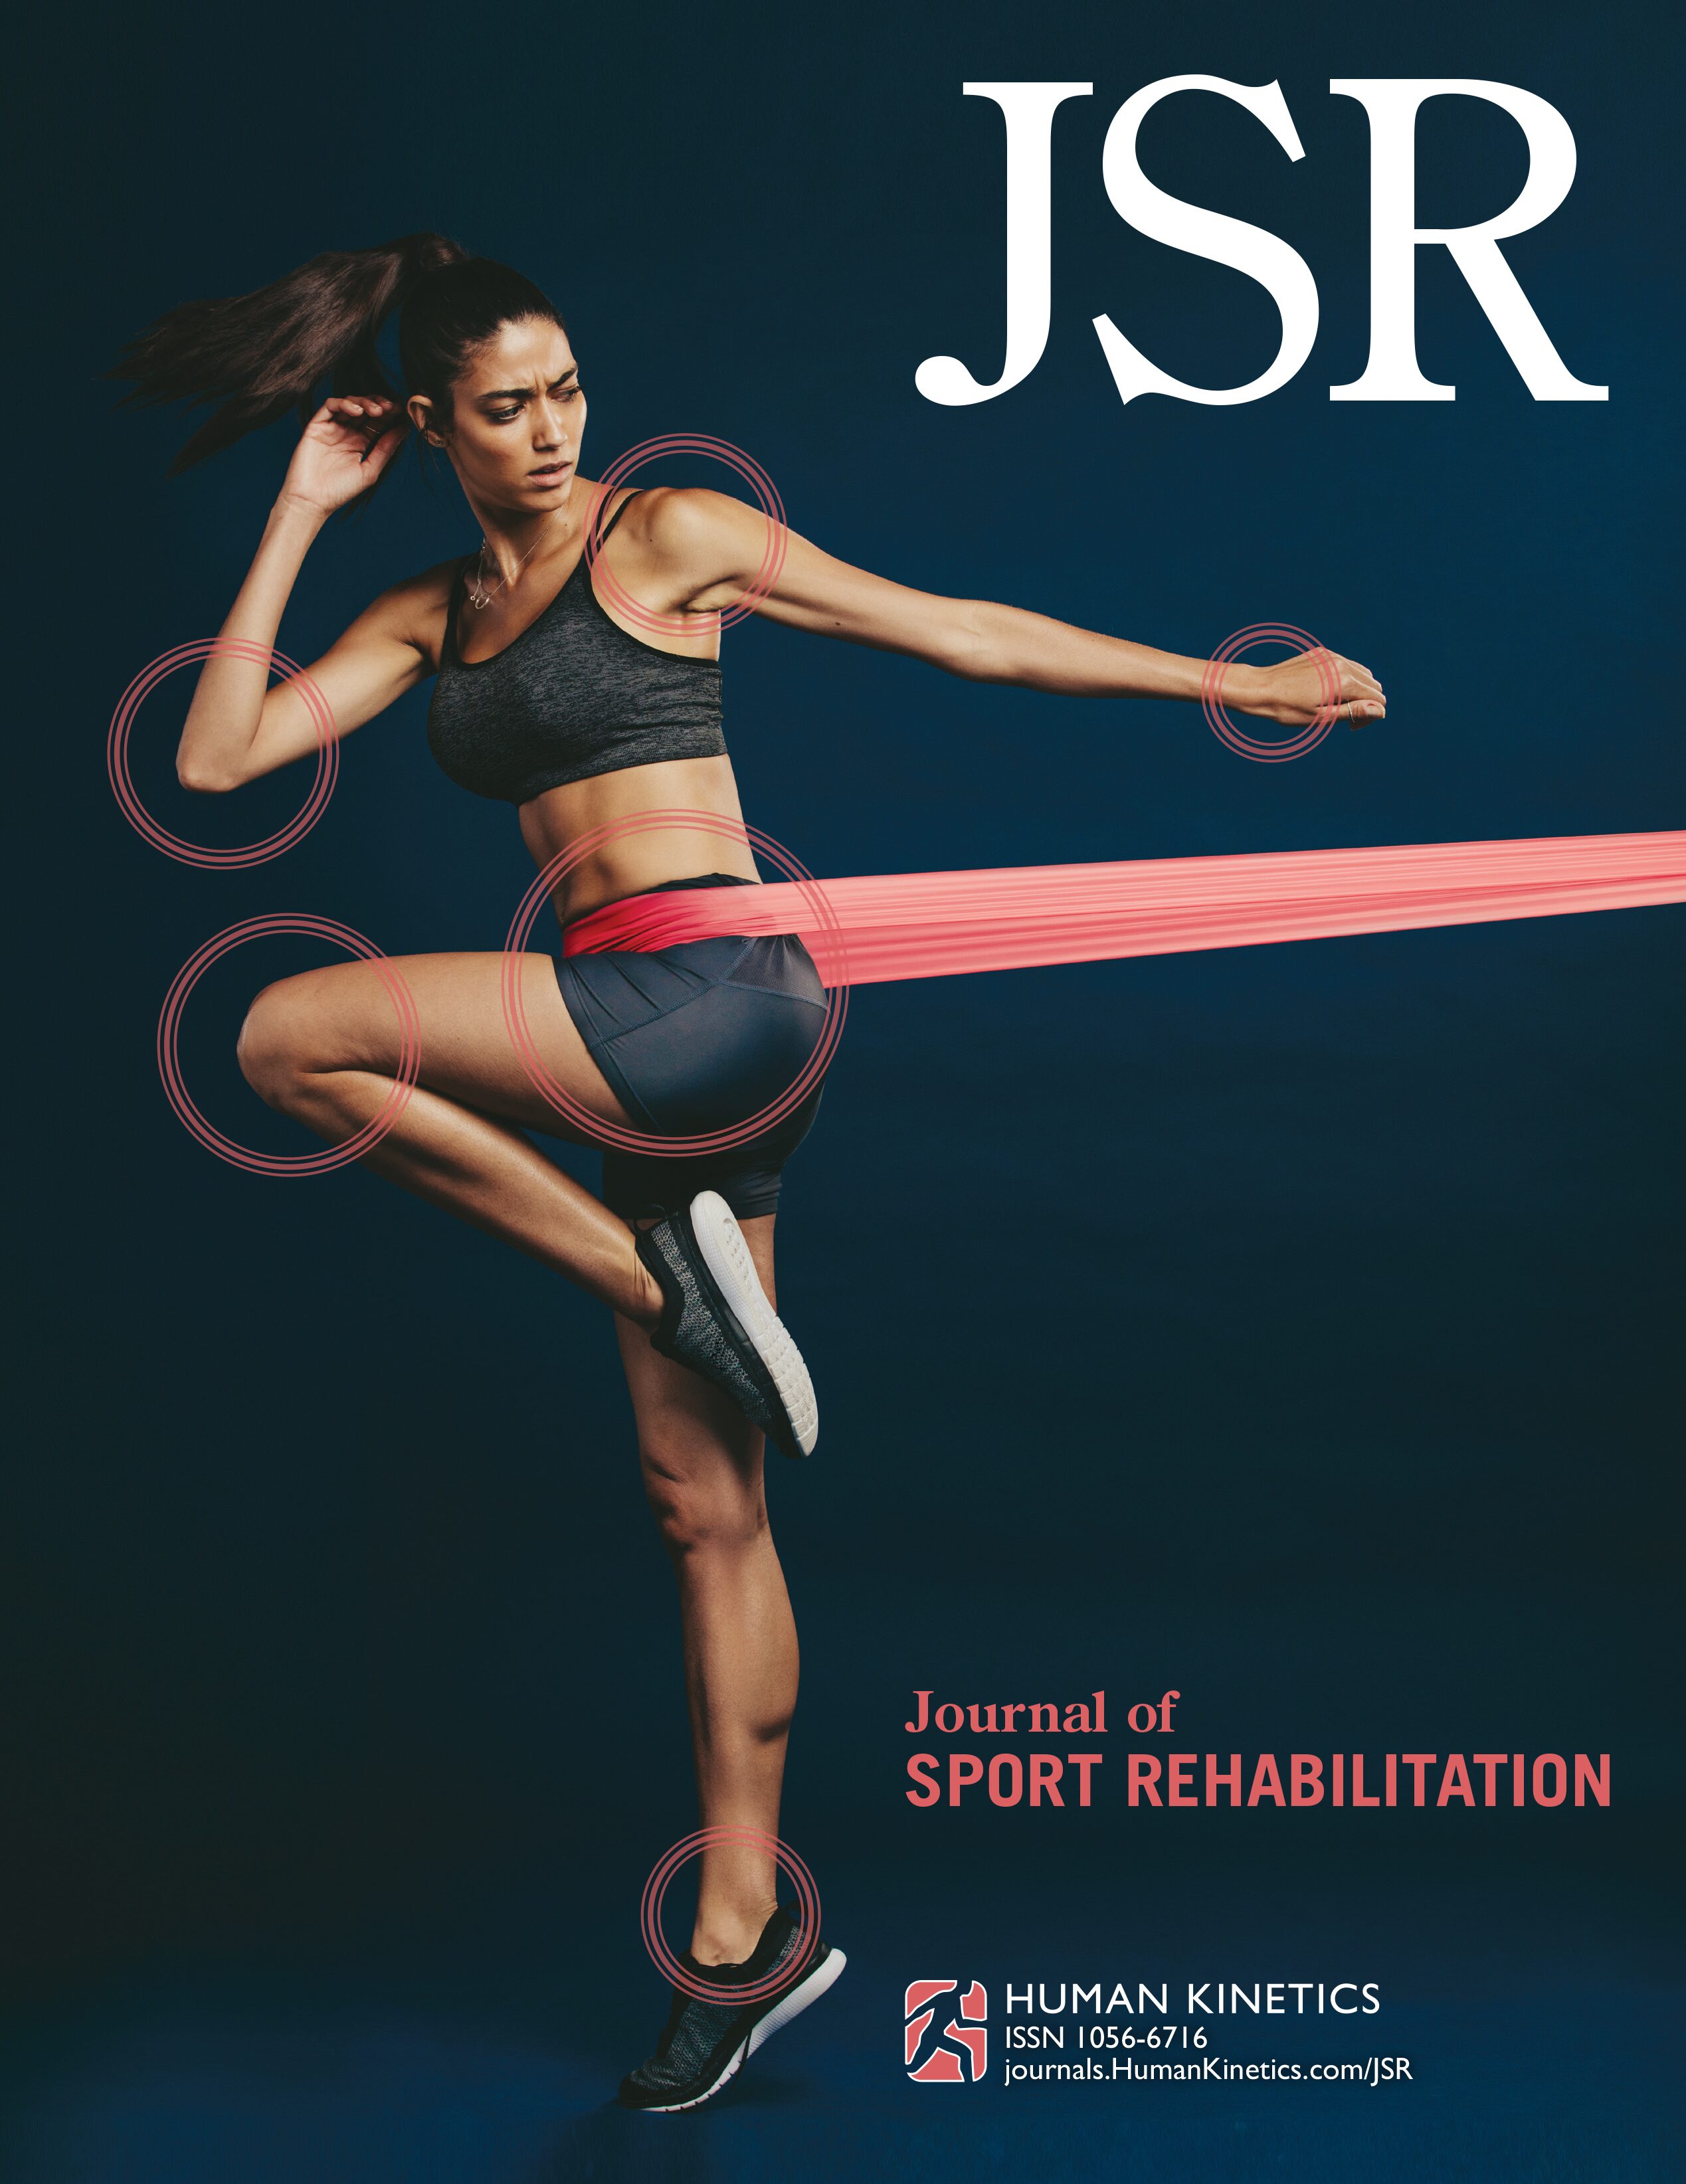 Return to Sport and Clinical Outcomes Following Osteochondral Autograft Transplantation in Baseball Players and Gymnasts With Unstable Osteochondritis Dissecans: A Critically Appraised Topic